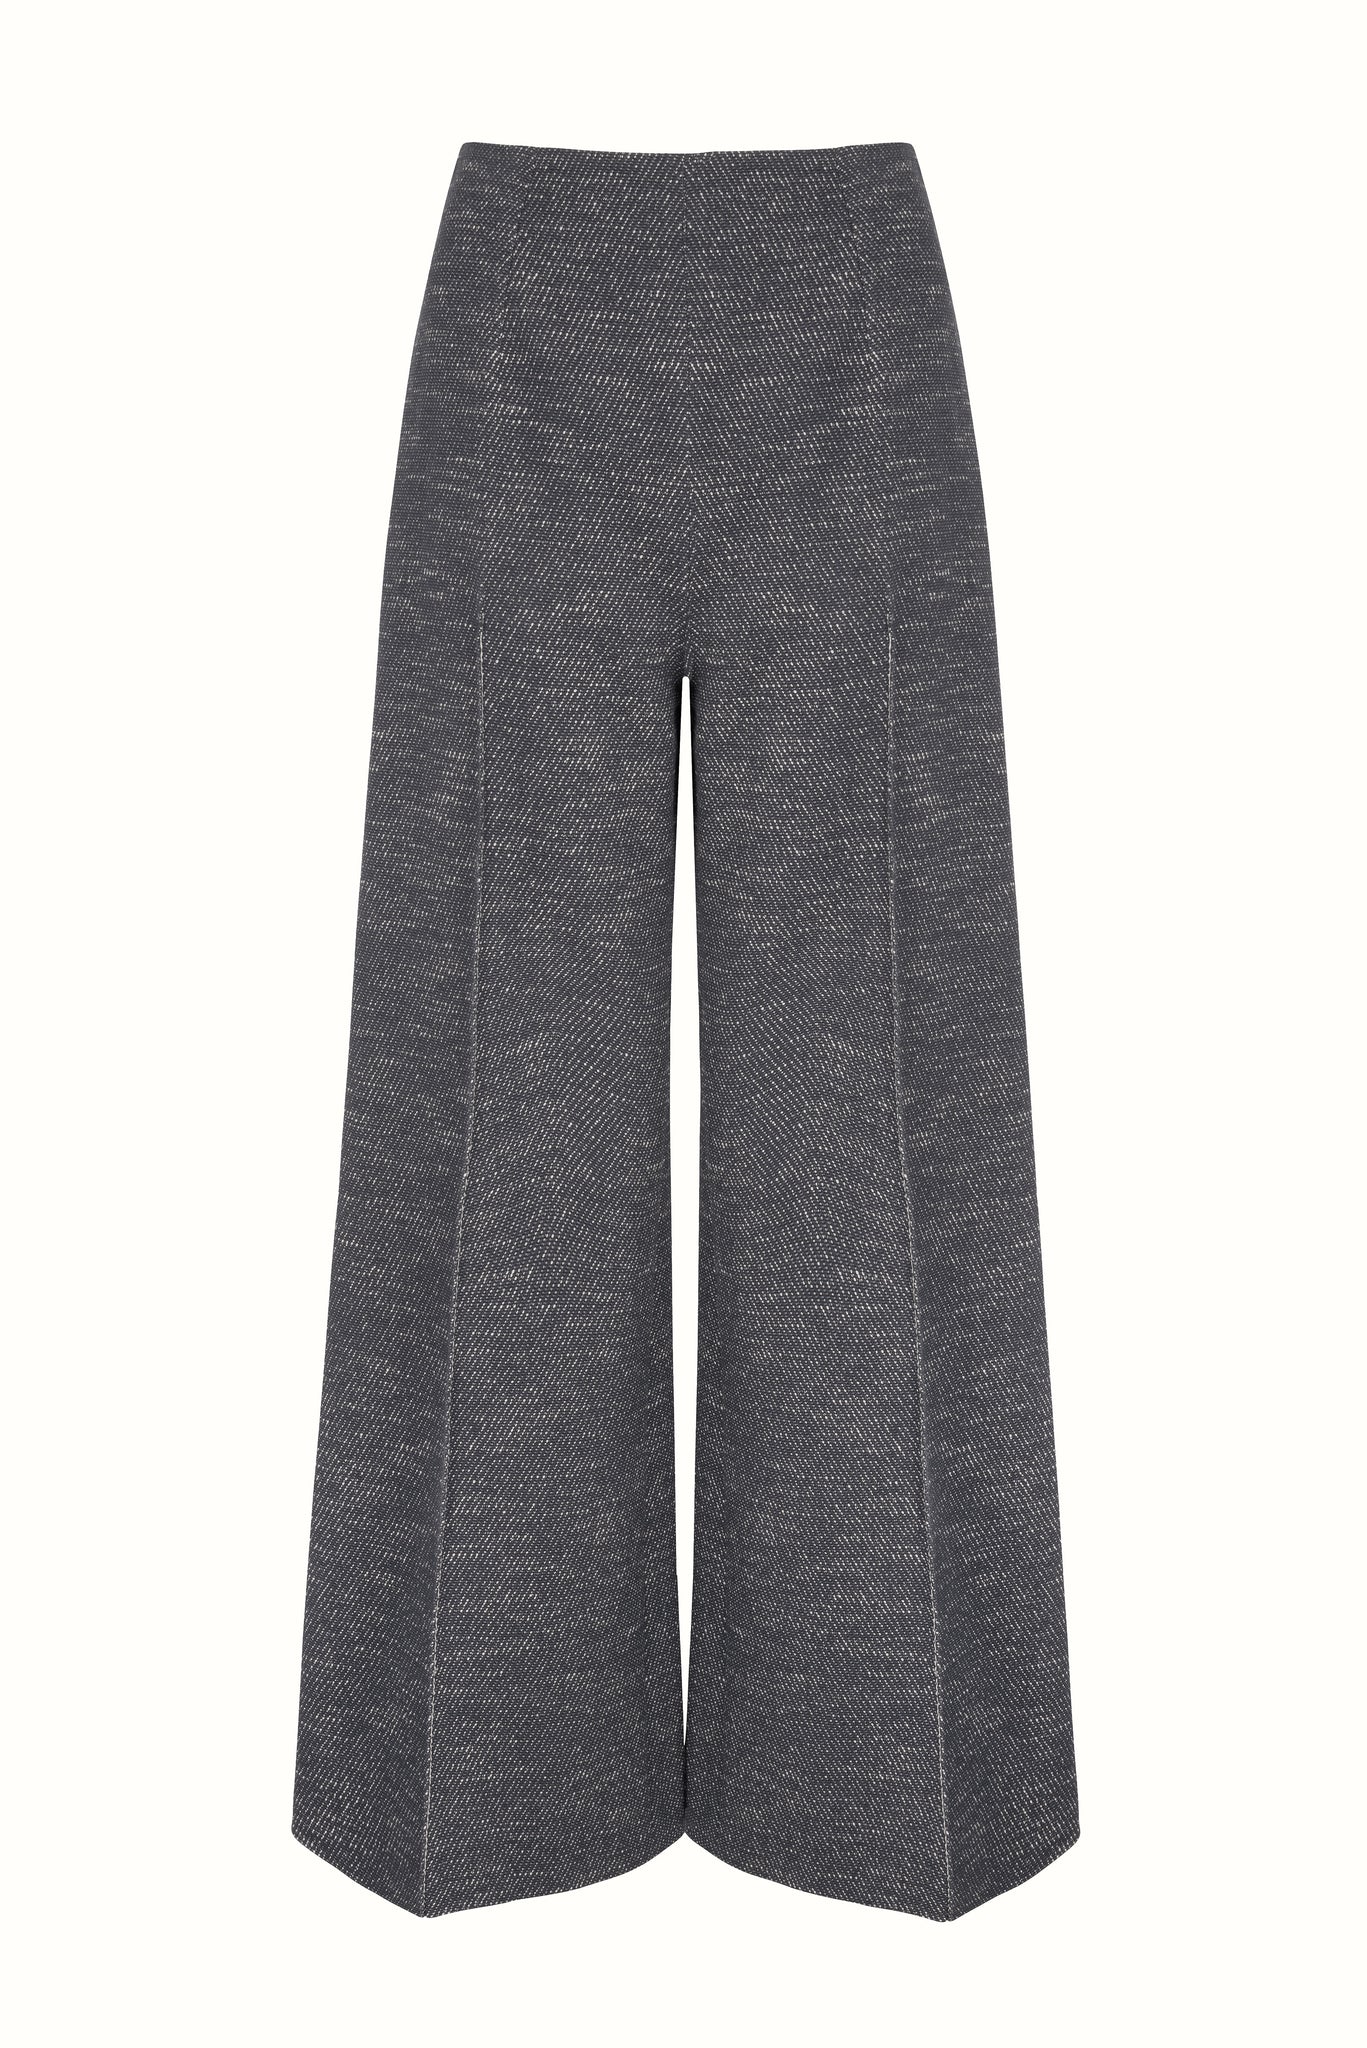 Daffy Trousers In Navy & Ivory Chevron Weave